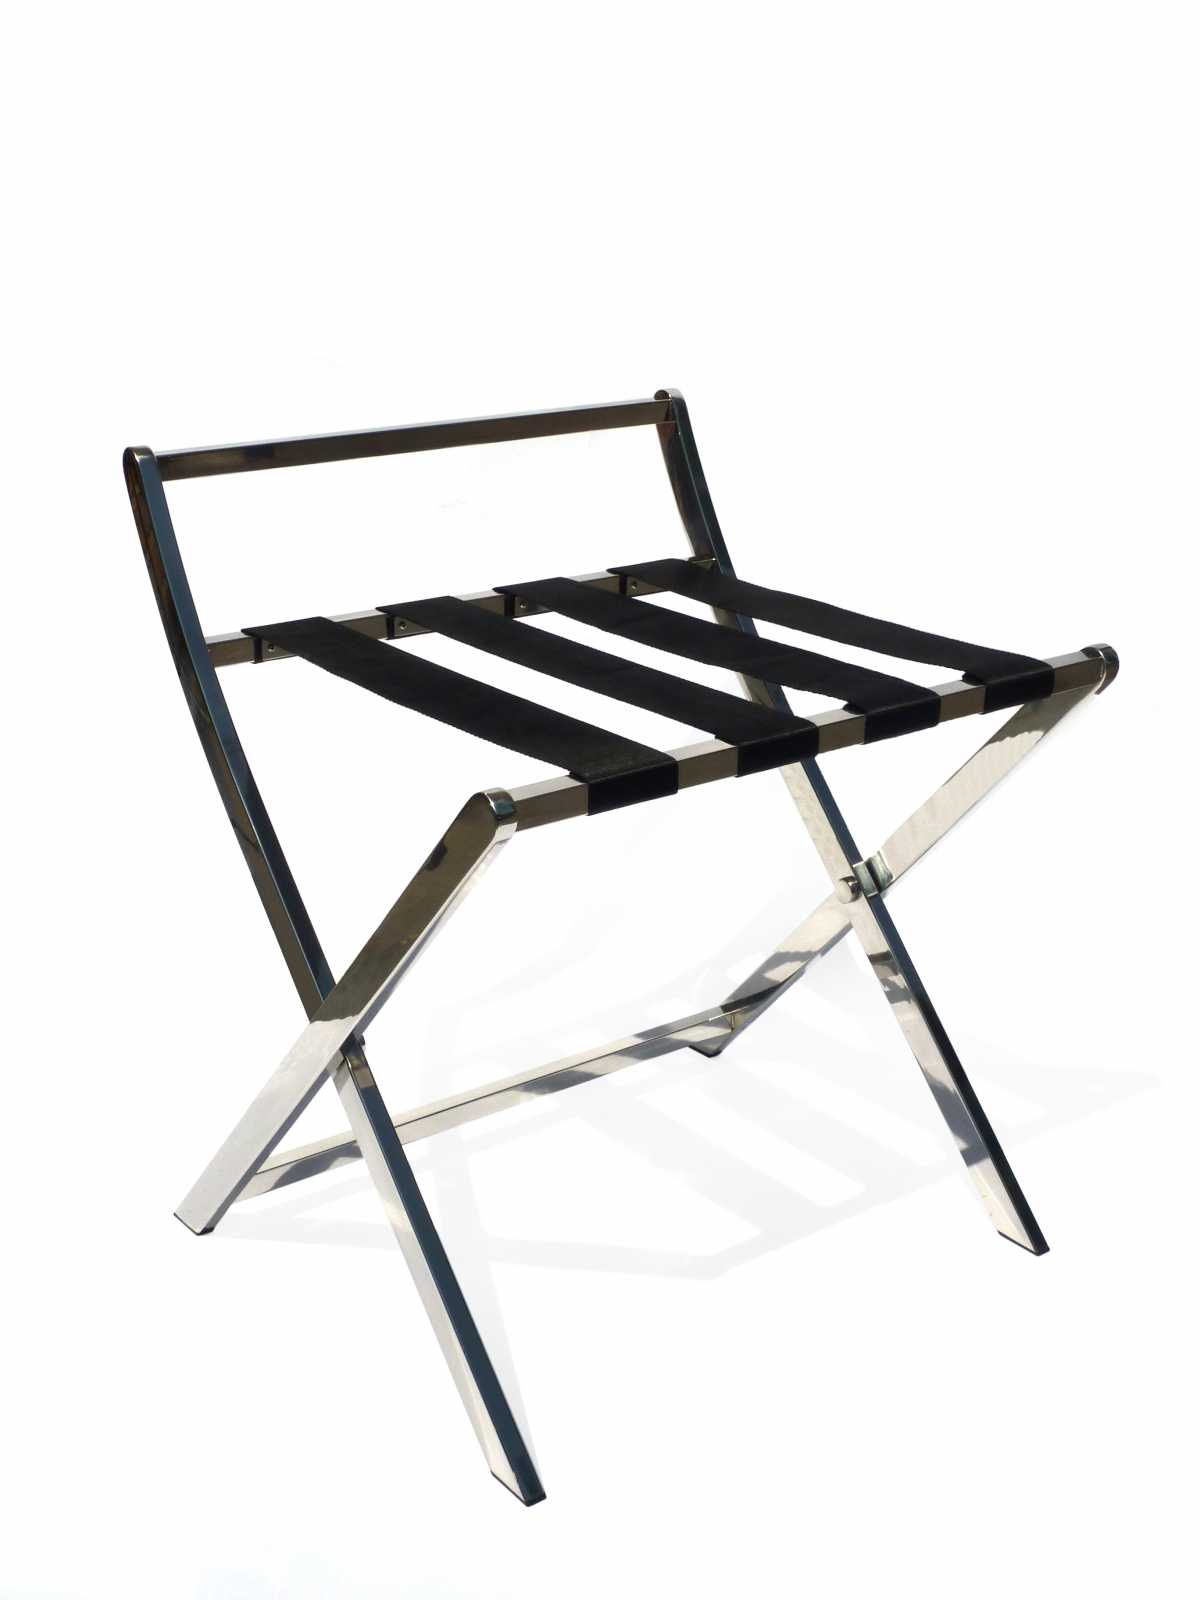 CRASTER Stainless Steel Luggage Rack with Backboard